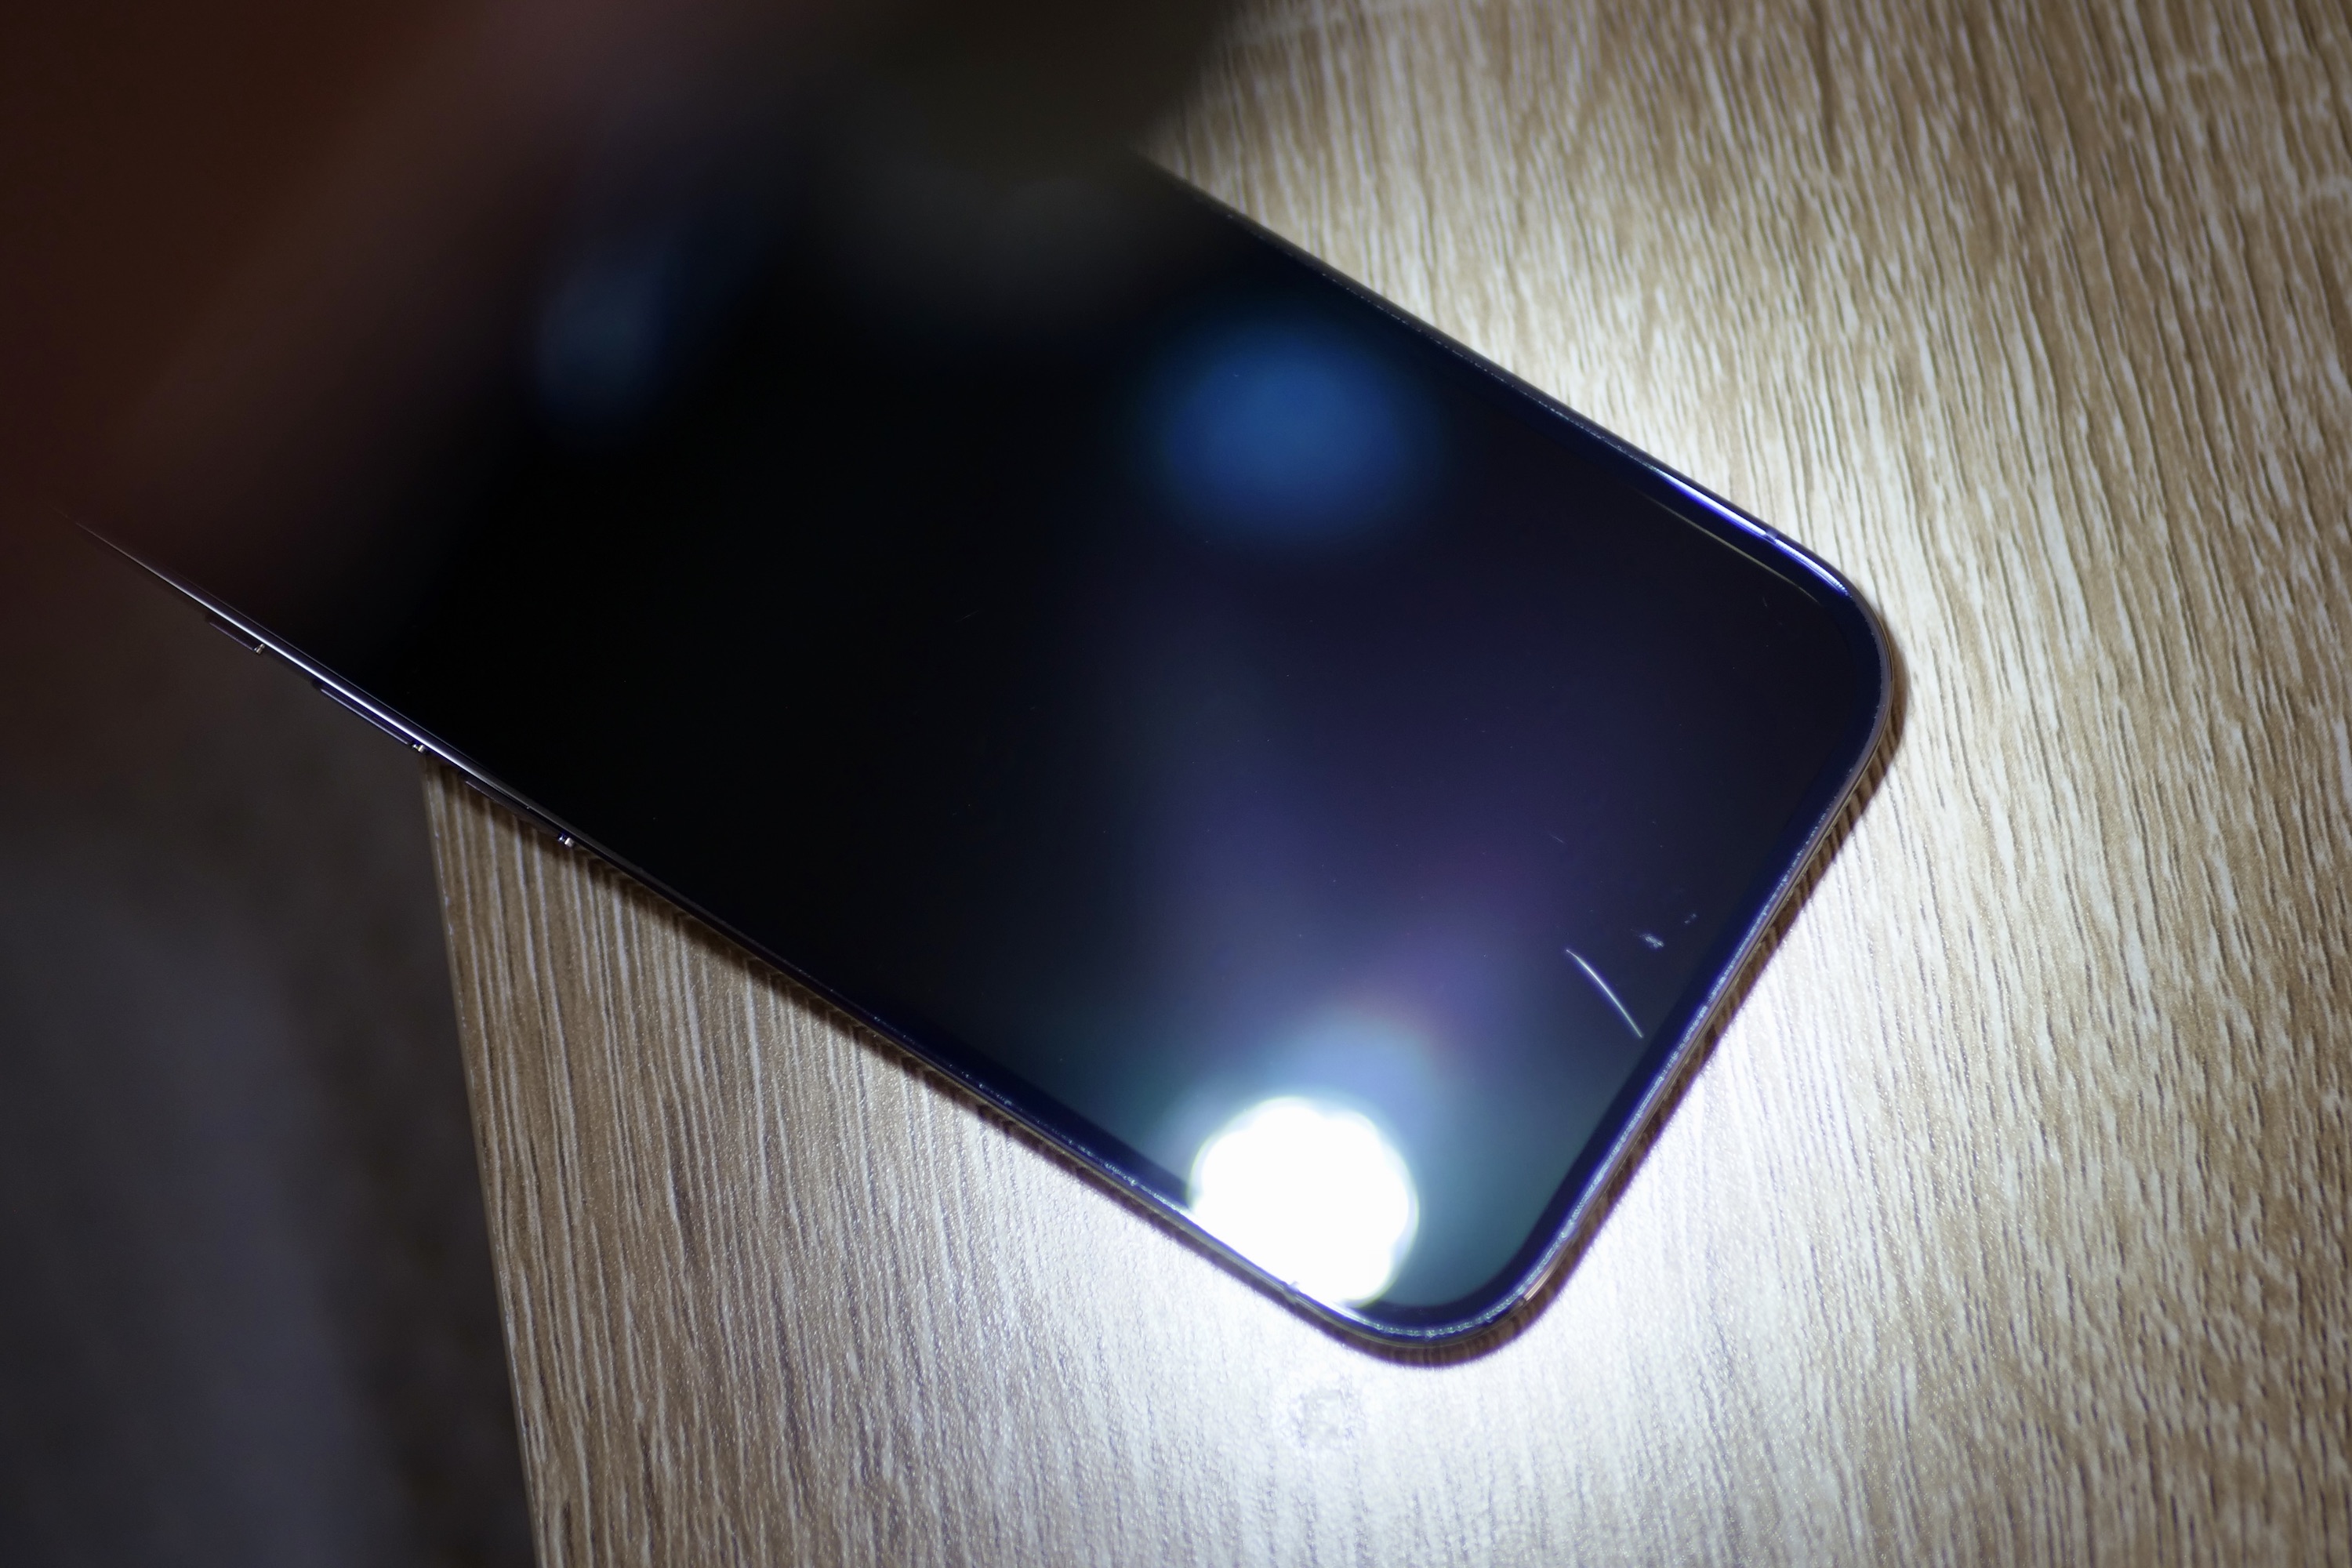 Ceramic Shield on the iPhone 14 Pro, with light to show scratches.